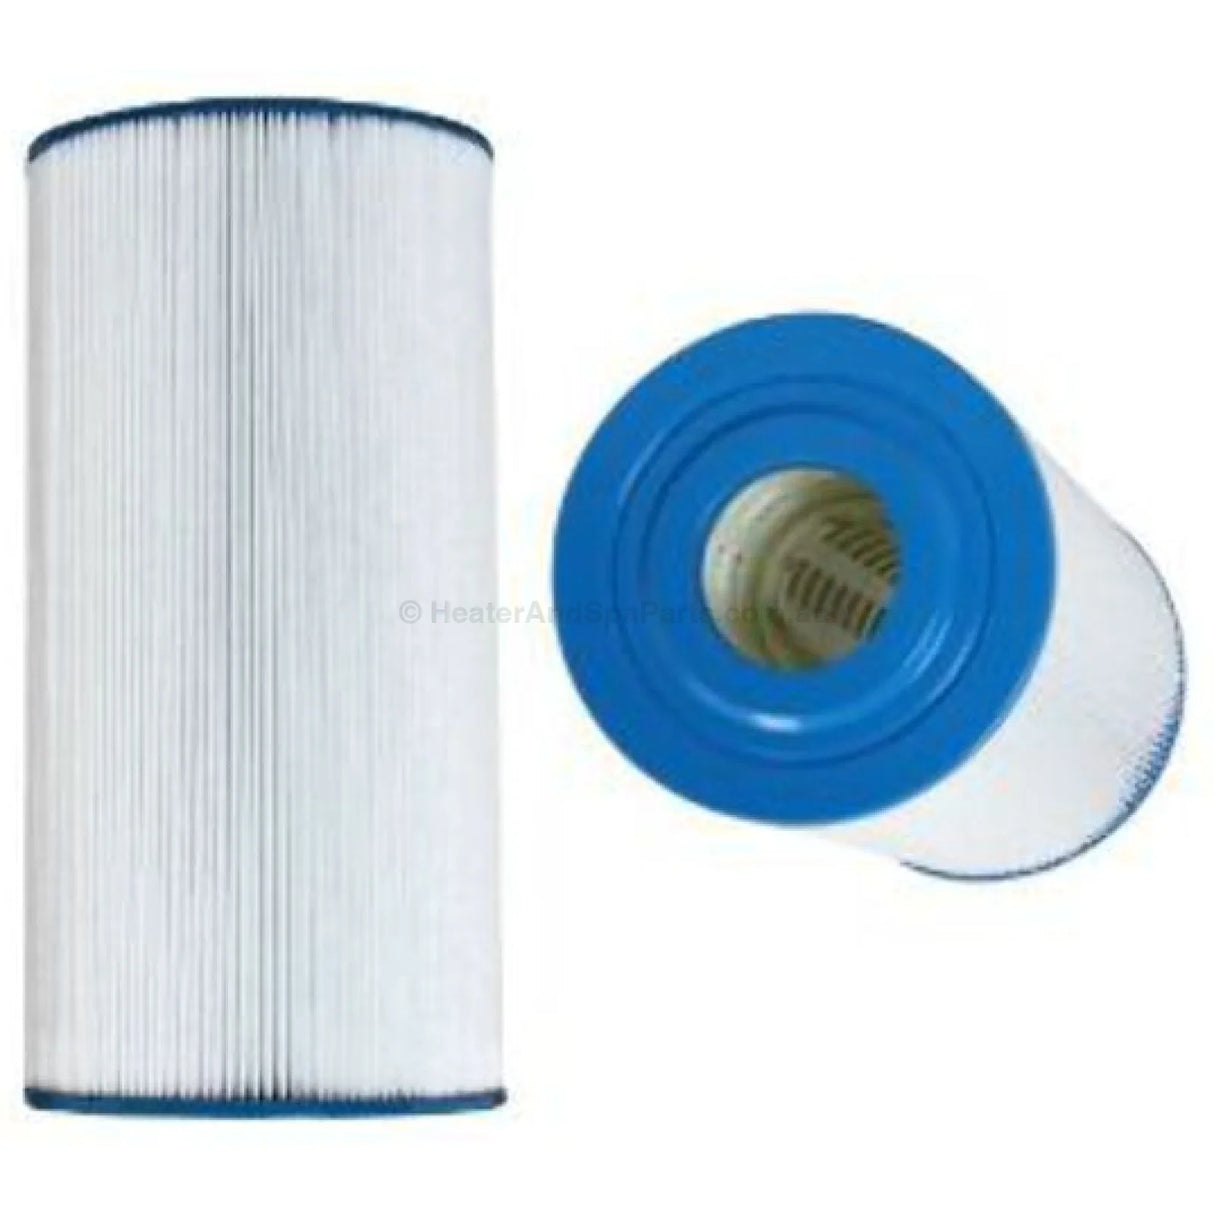 370mm x 185mm Cartridge Filter Replacement - Monarch EcoPure 75 / Poolrite Enduro EC75 - Heater and Spa Parts